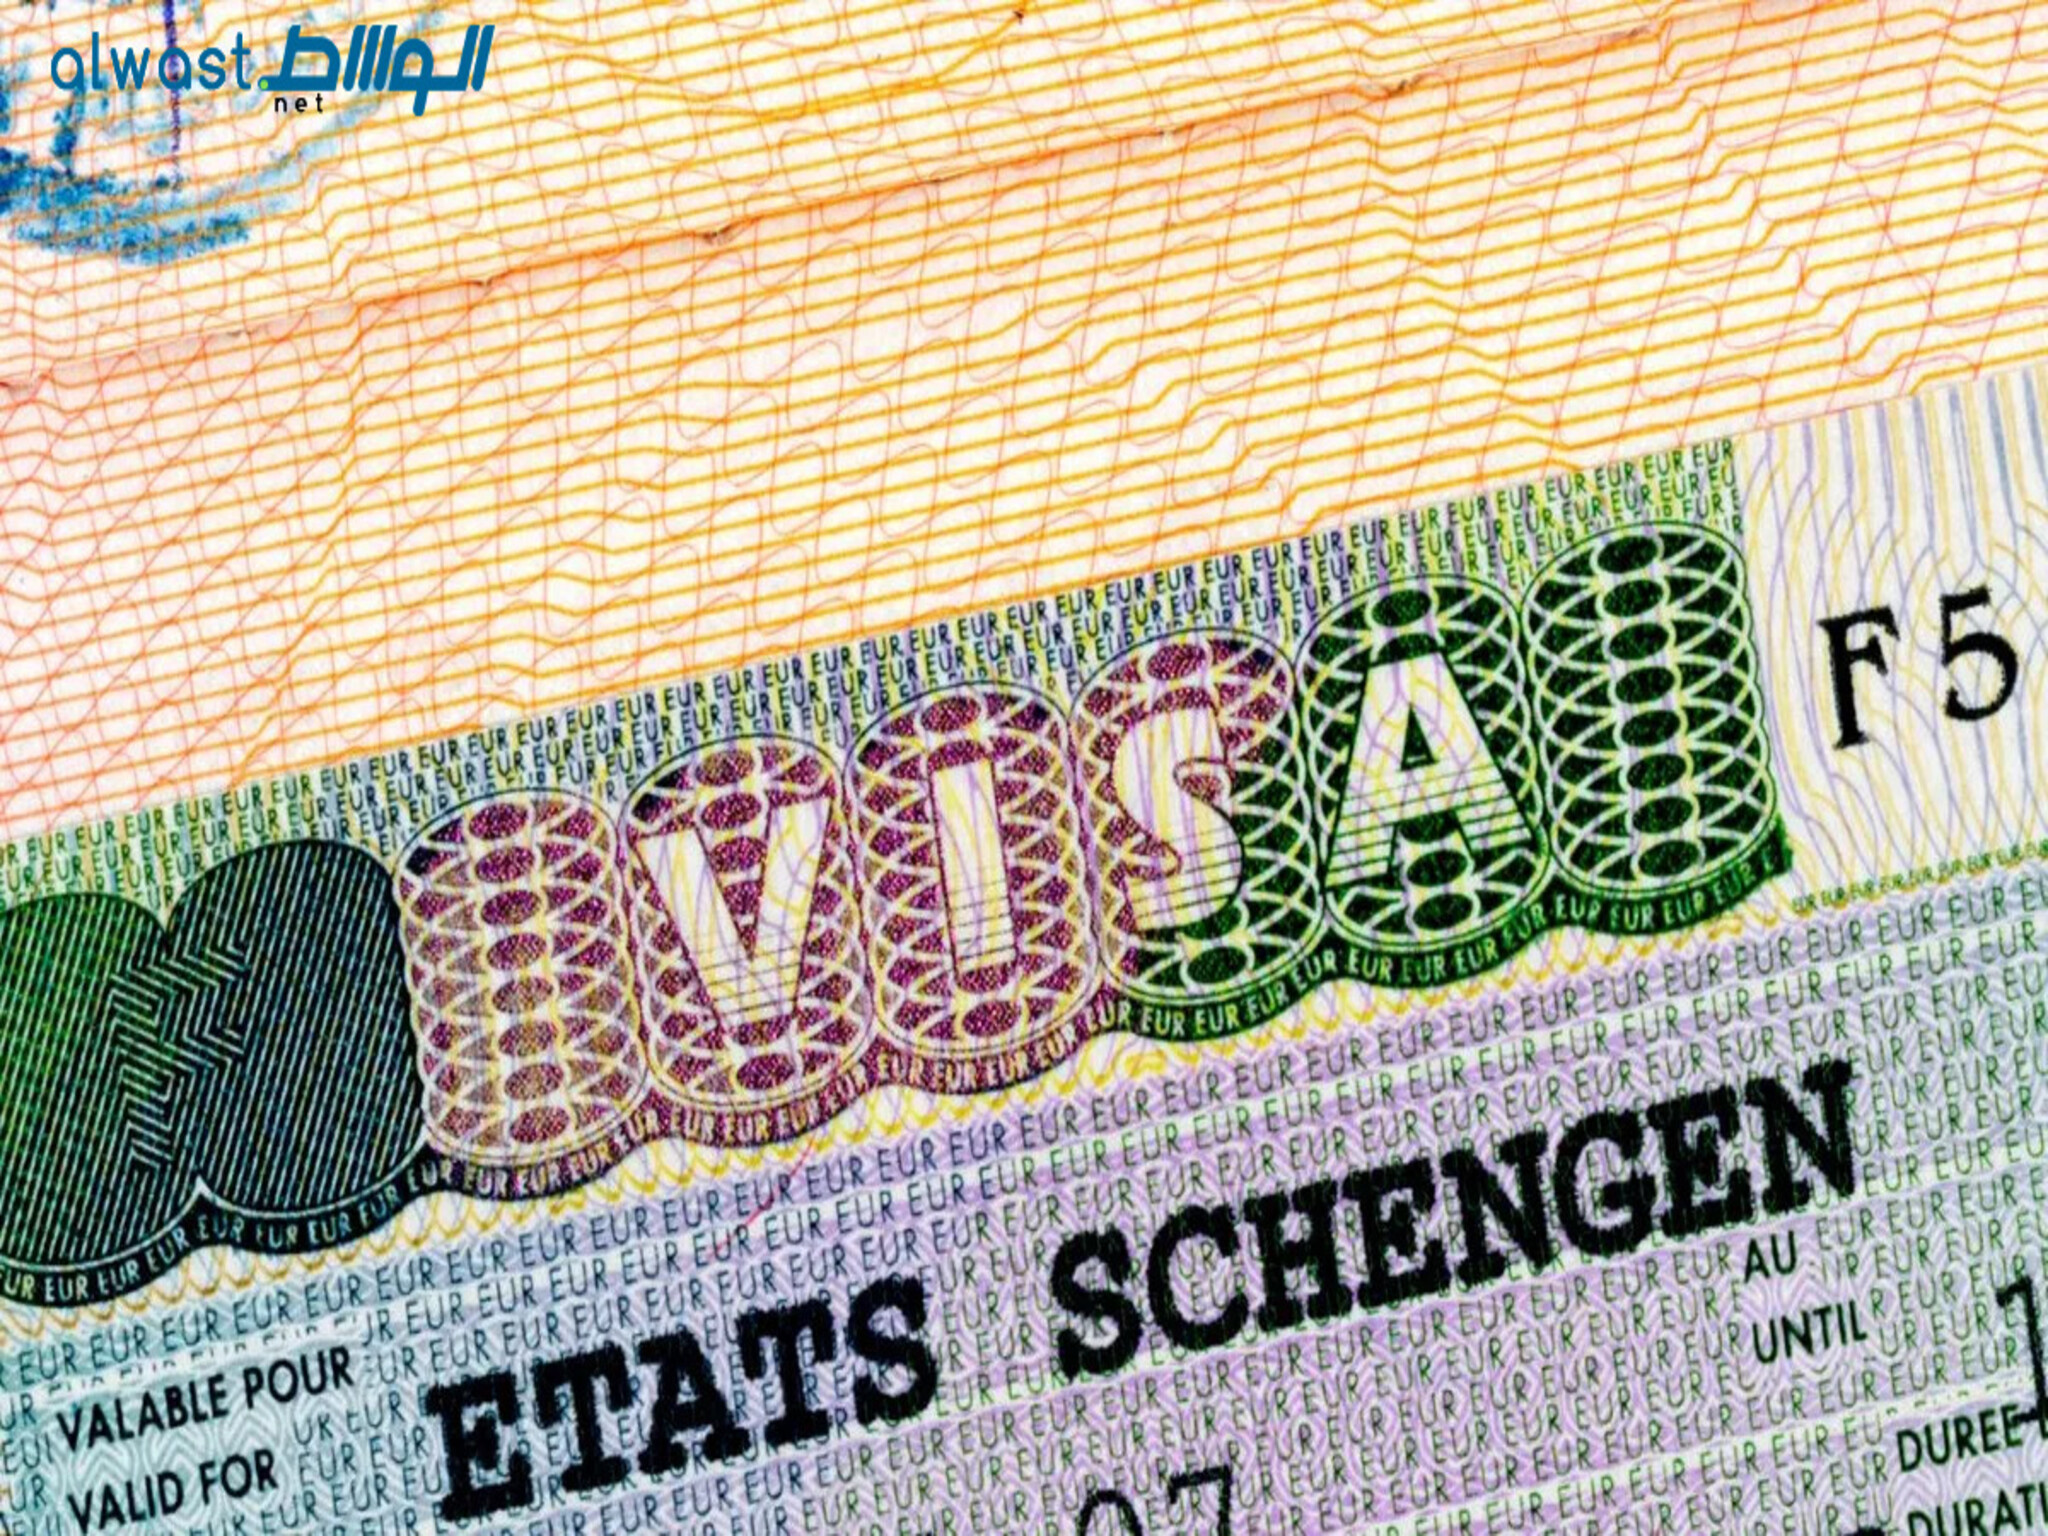 Schengen visa fees to increase by 12% starting June 11th